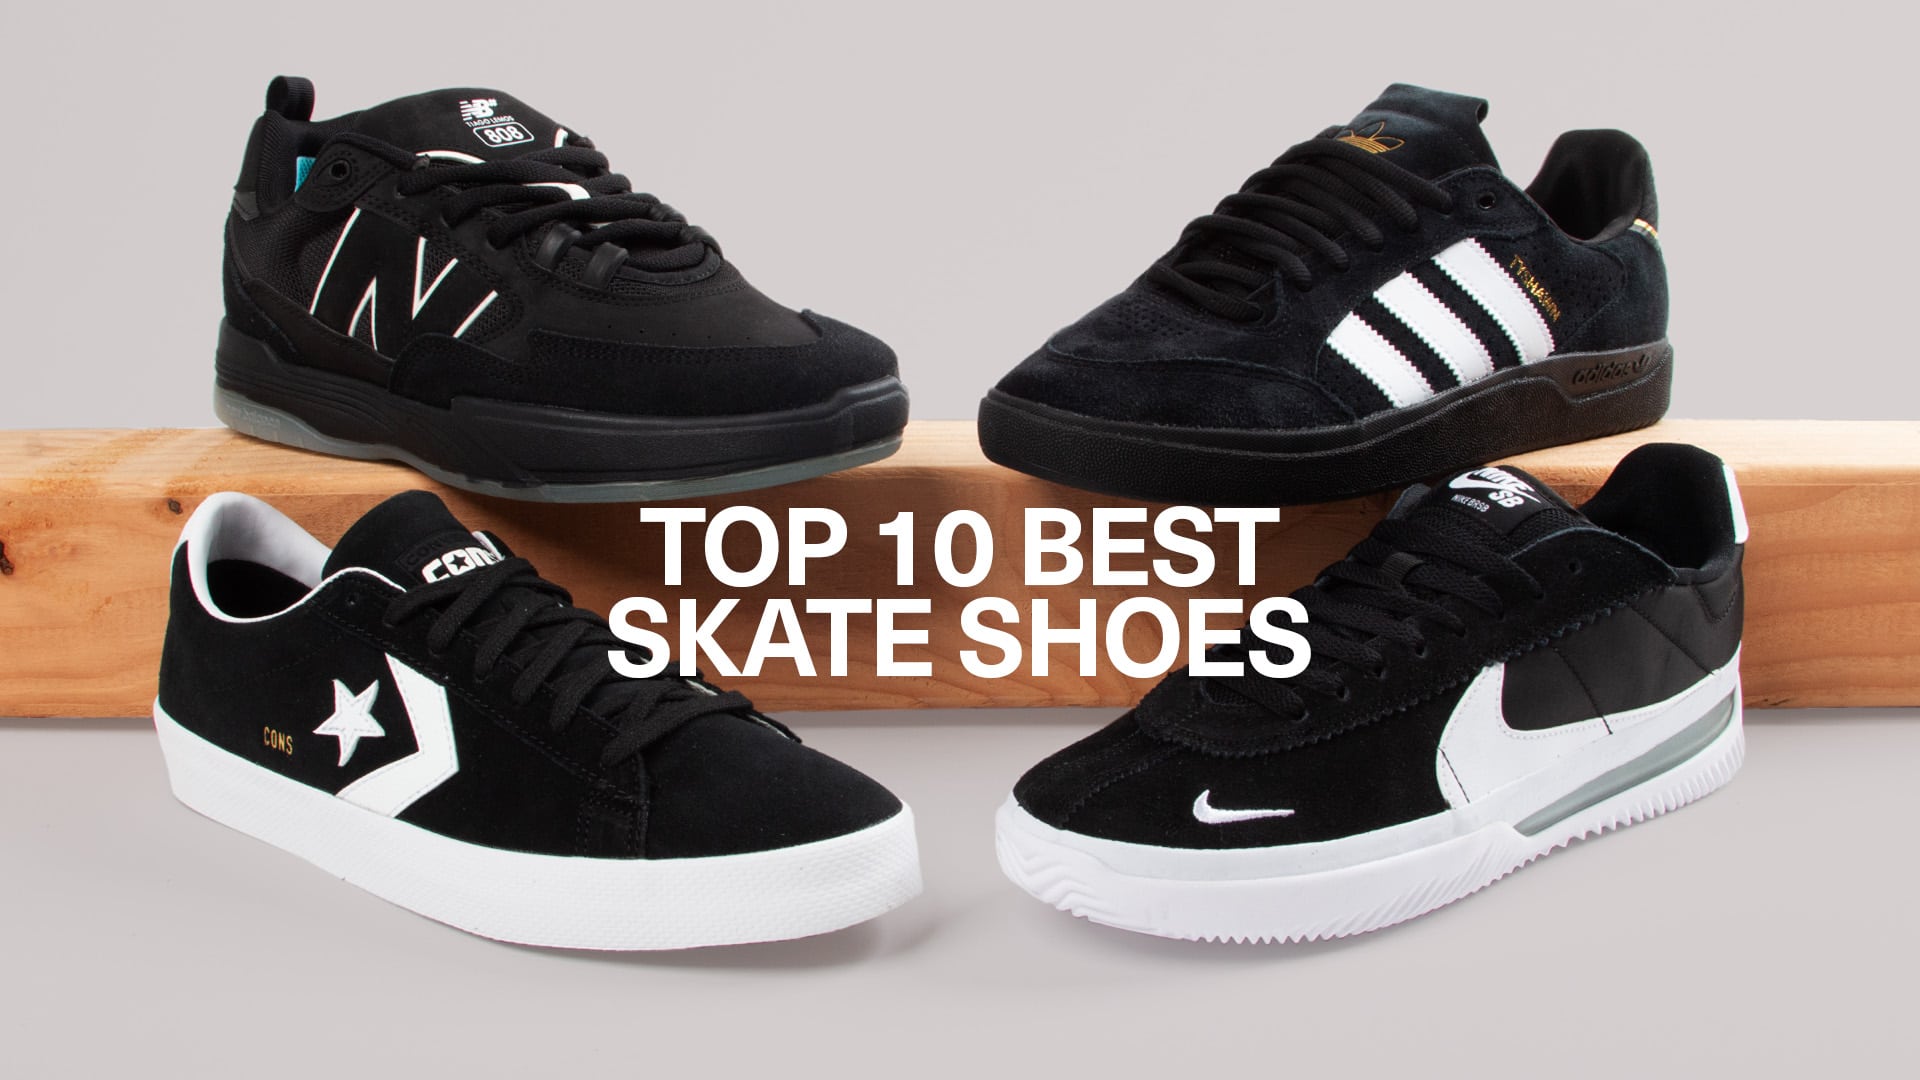 Top 10 Best Skate Shoes: The Guide To Highly Skateable Shoes